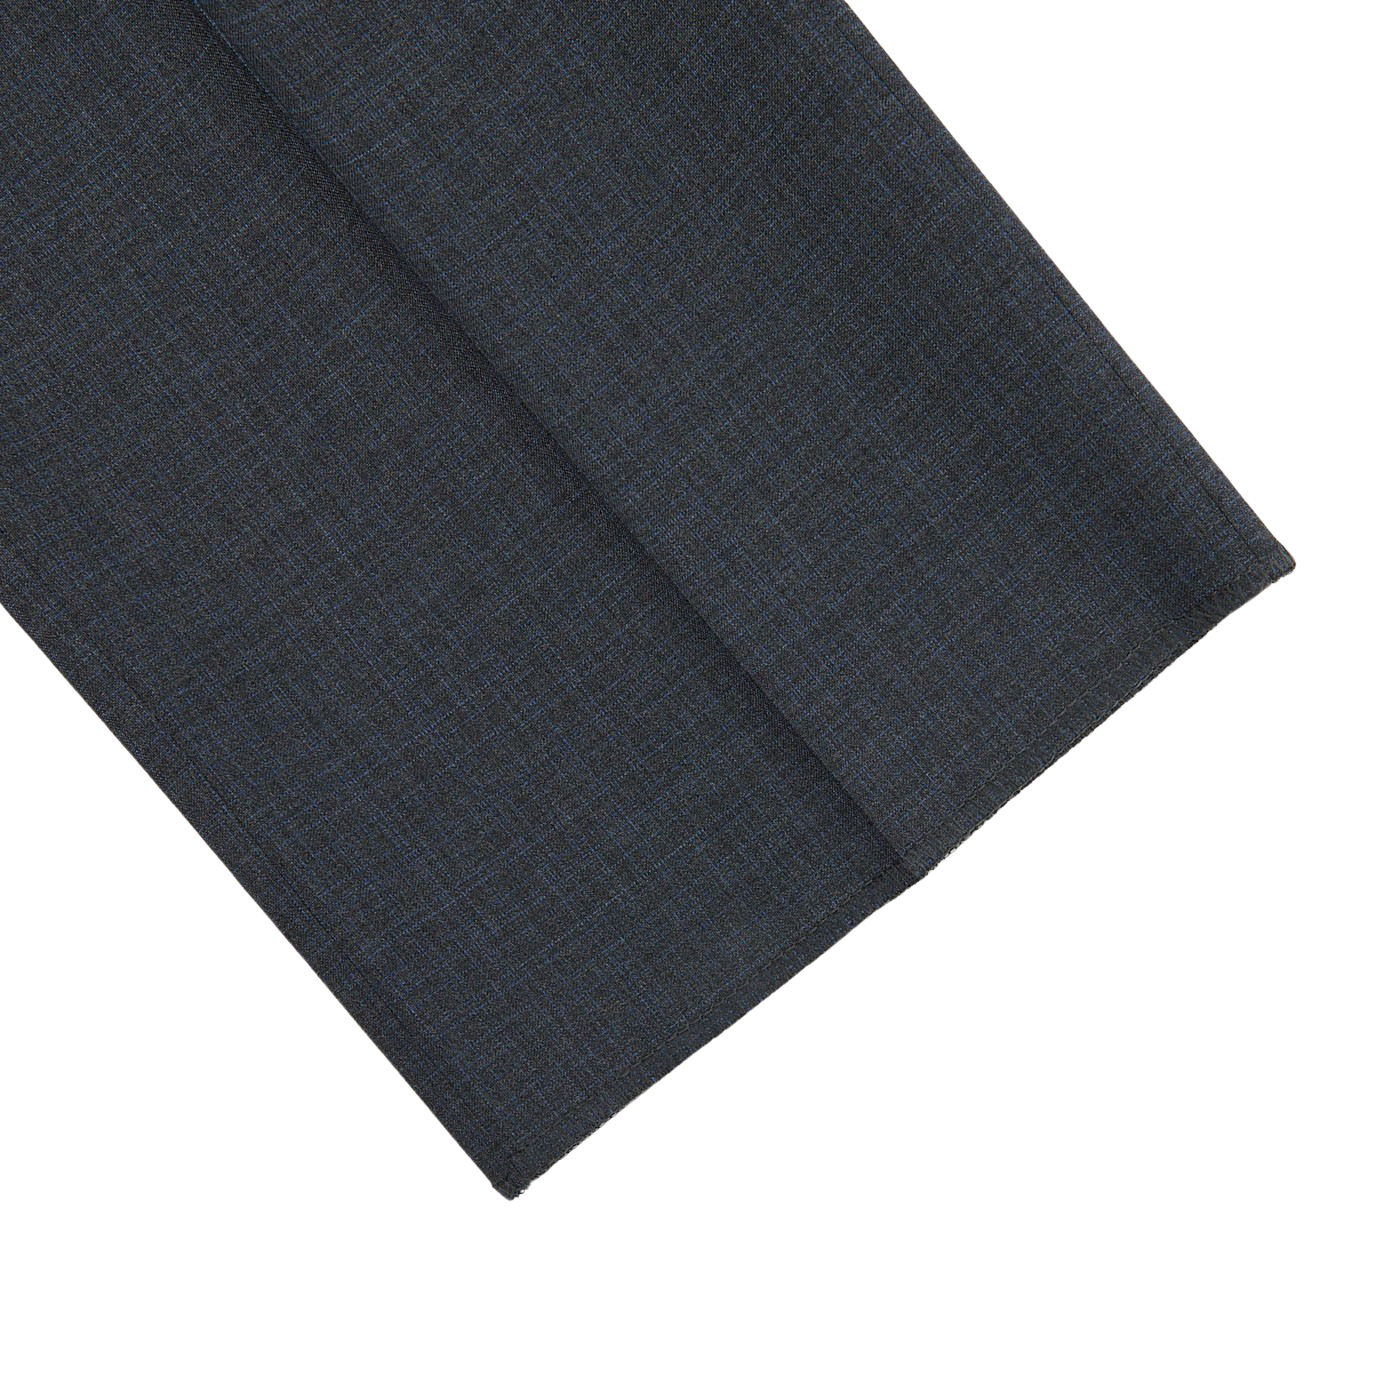 A traditional Canali tailored dark blue suit with a checkered pattern, made from high-quality Grey Blue Melange Checked Wool Trousers.